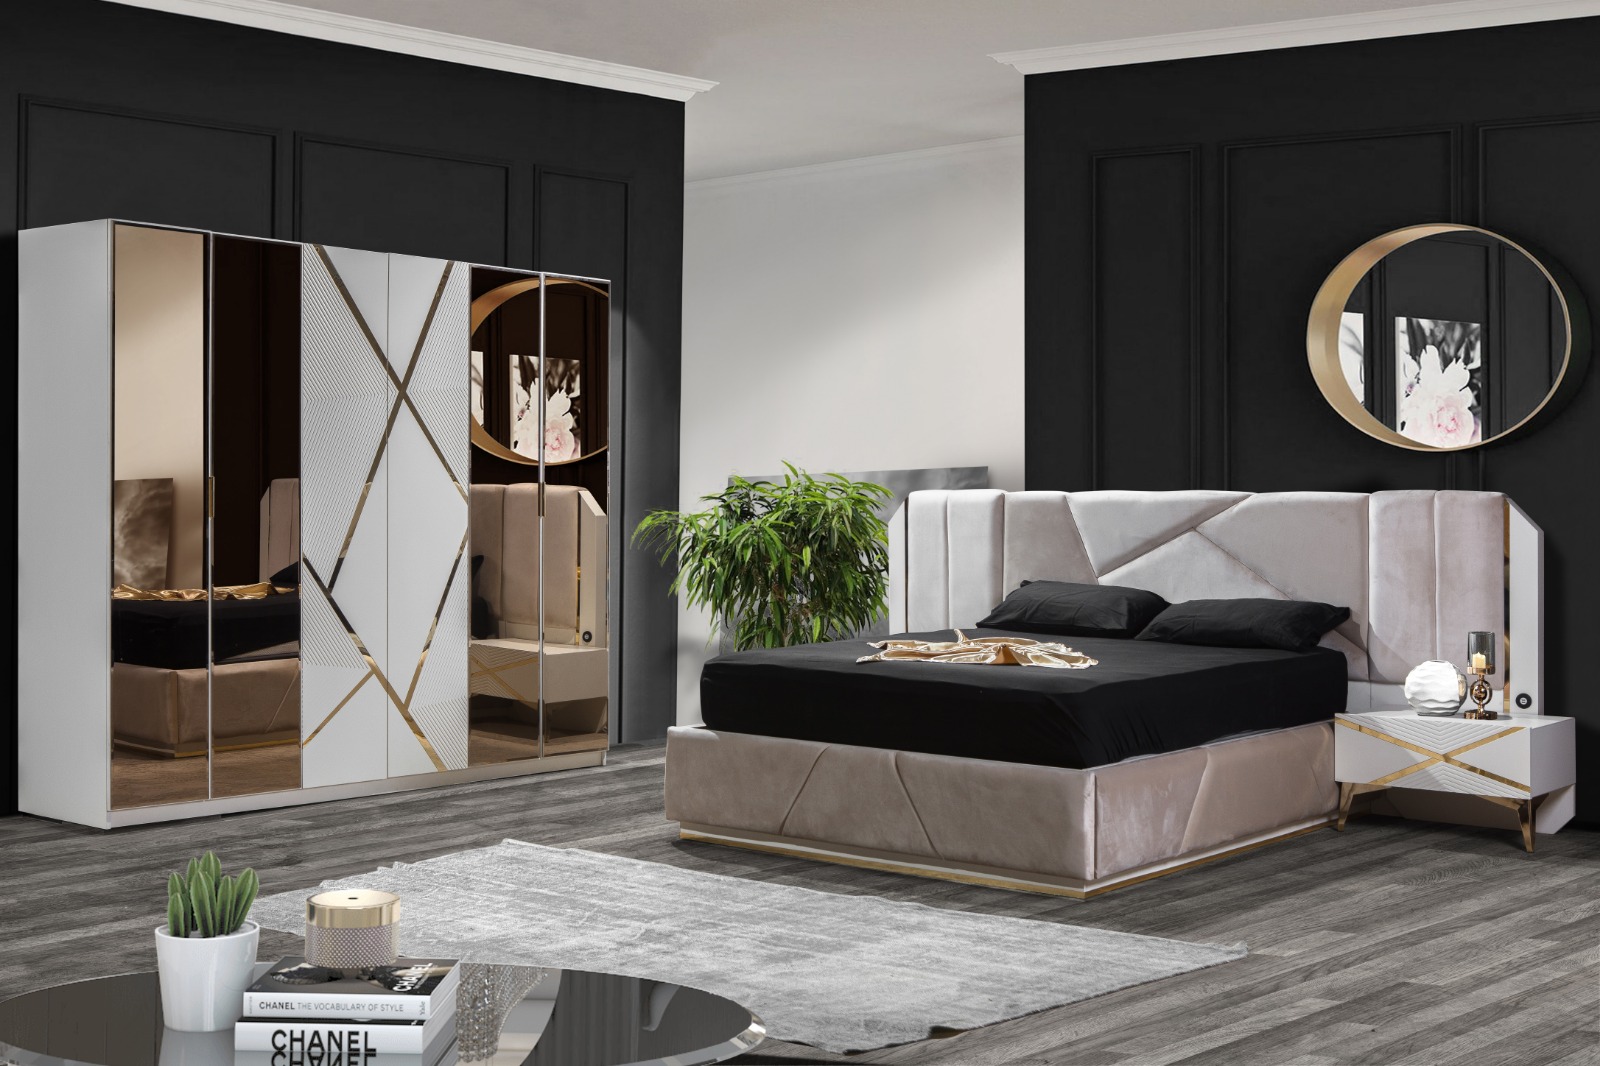  This set incorporates the lovely luster of black and white and mirror accents to create an alluring focal point in your interiors. The set includes a bed, two nightstands, a dresser, a mirror, and a stand.